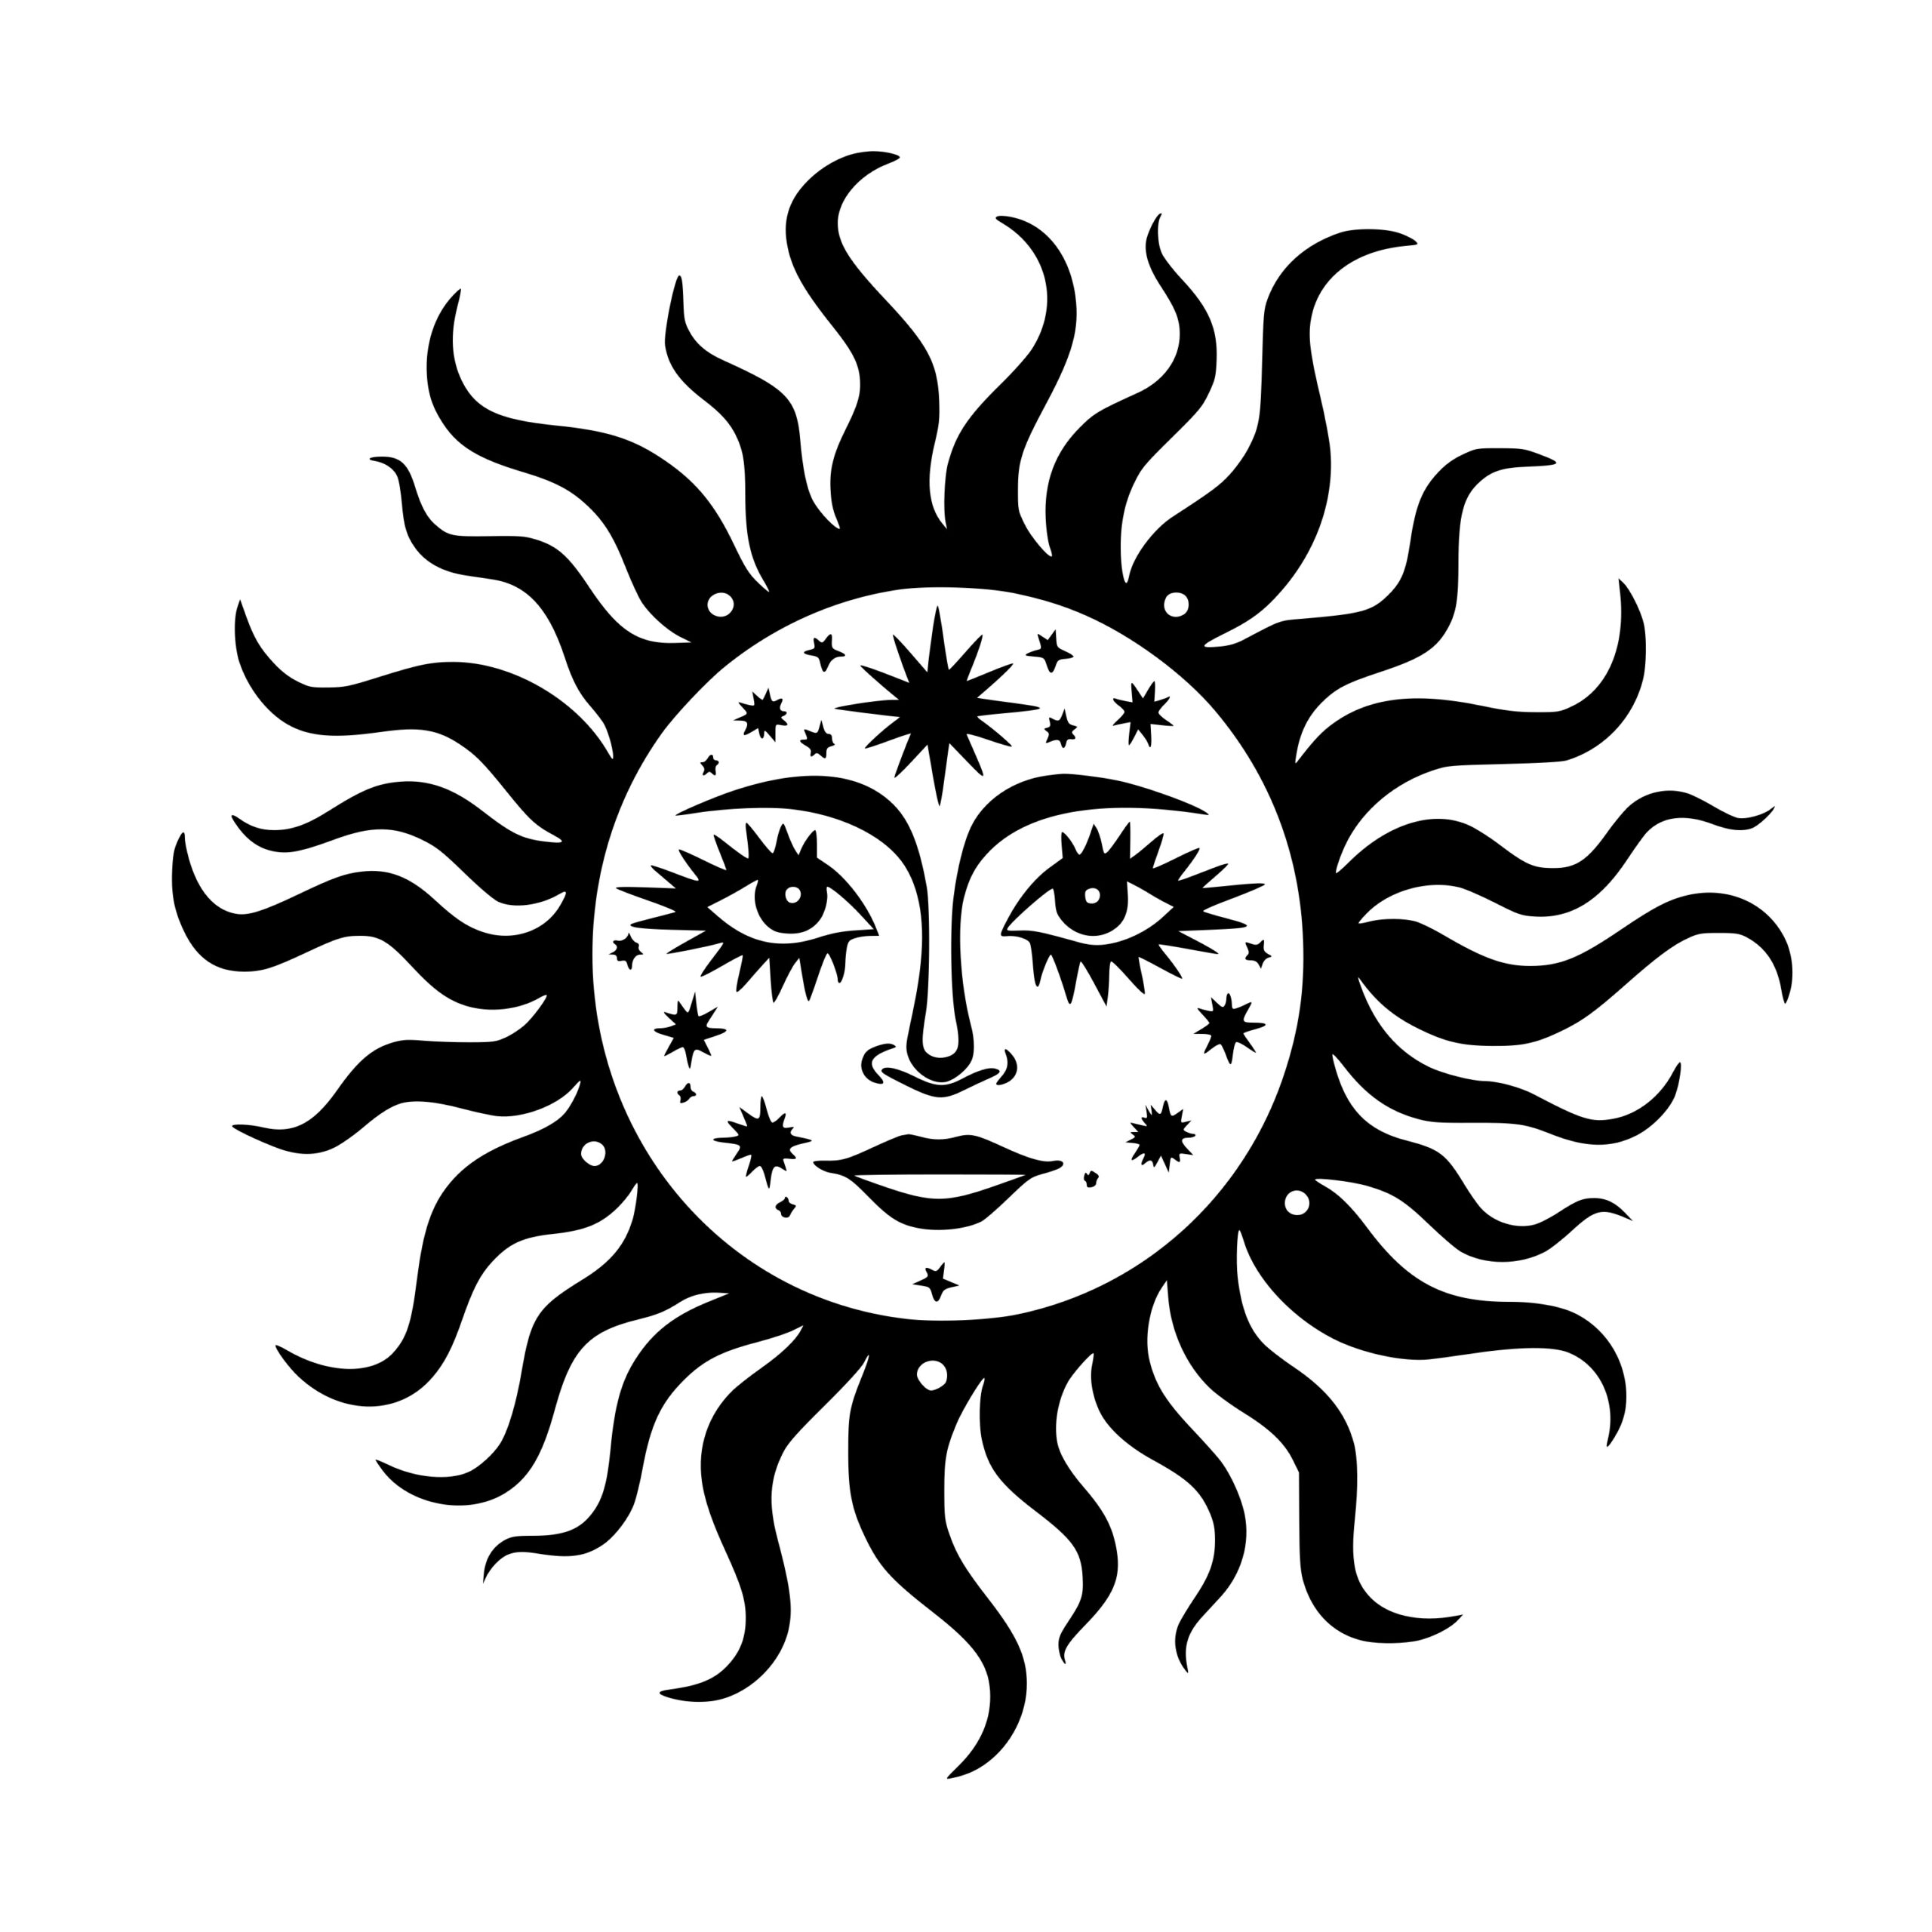 Smiling Sun SVG File for Cricut, Silhouette, and Laser Machines